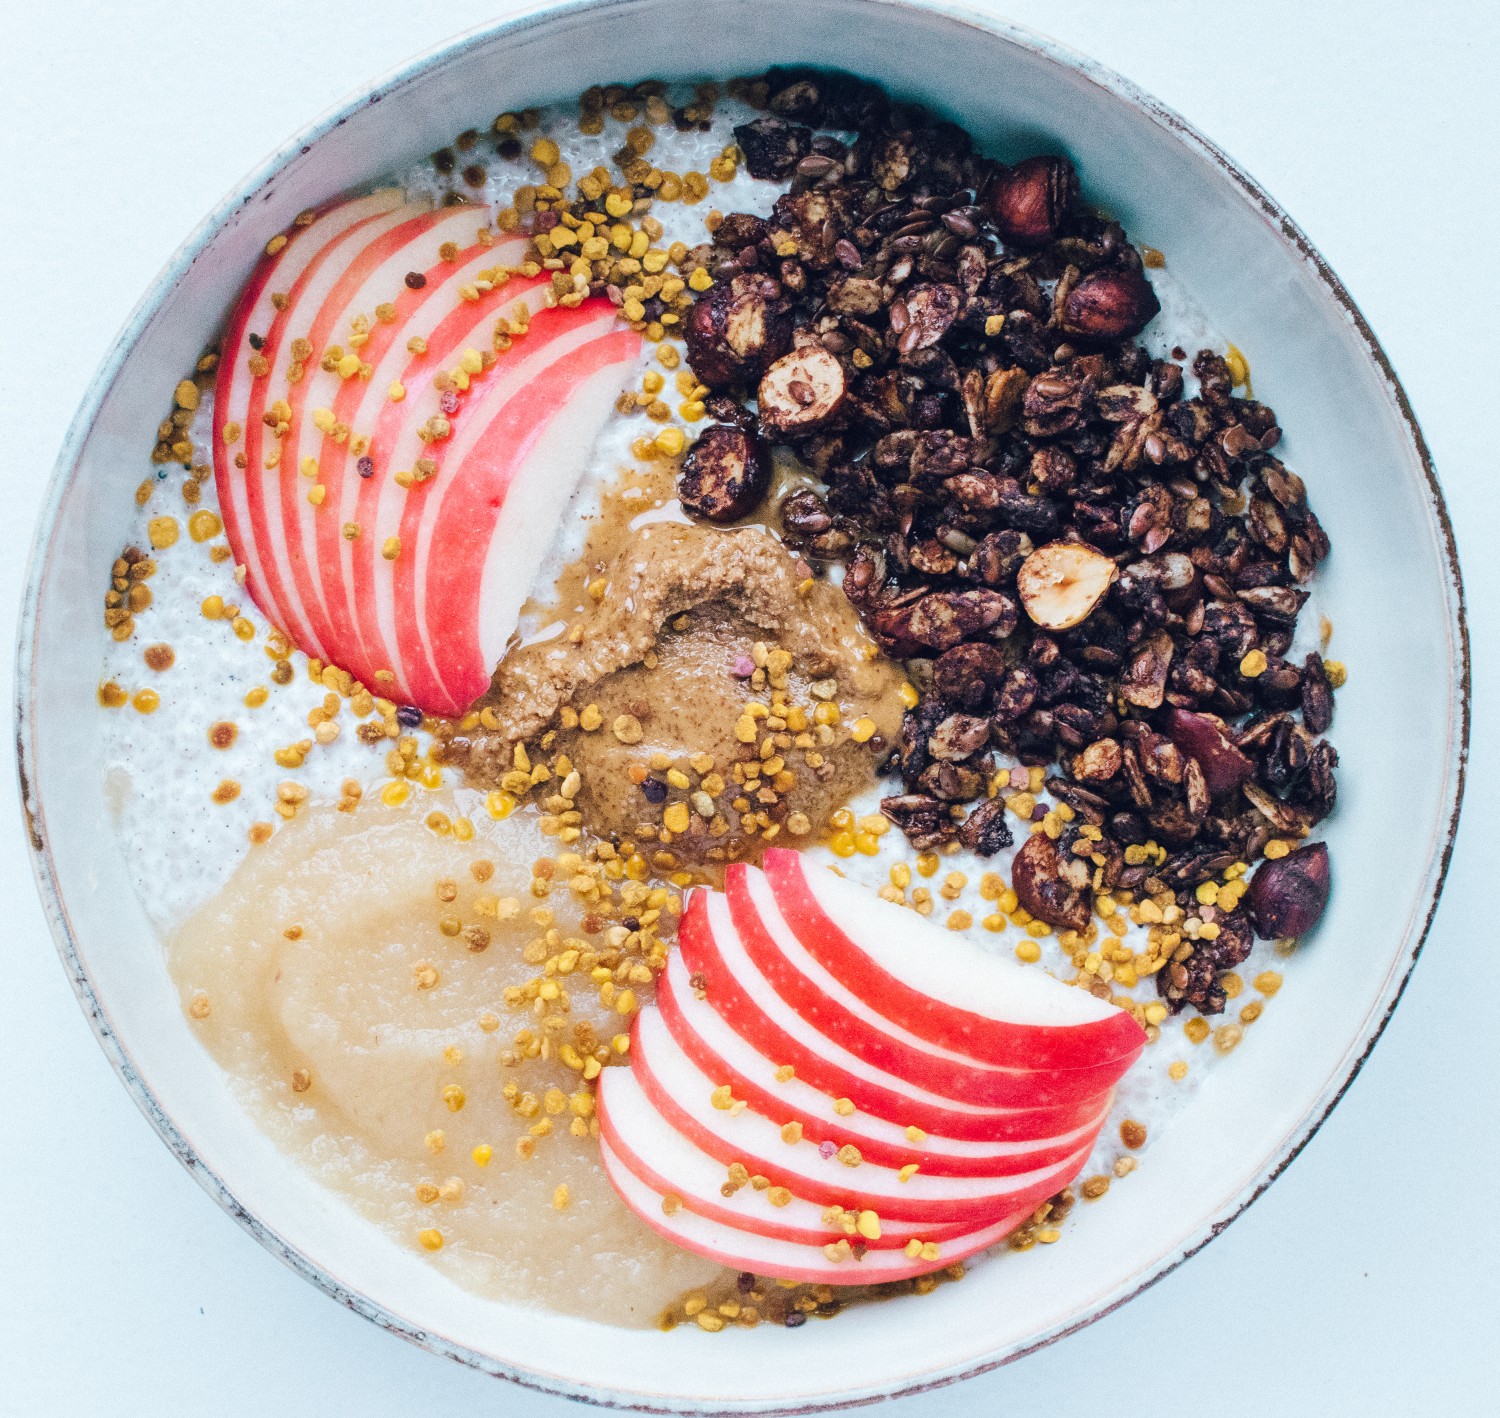 Easy Everyday Food // Chia pudding with chocolate granola and fall toppings